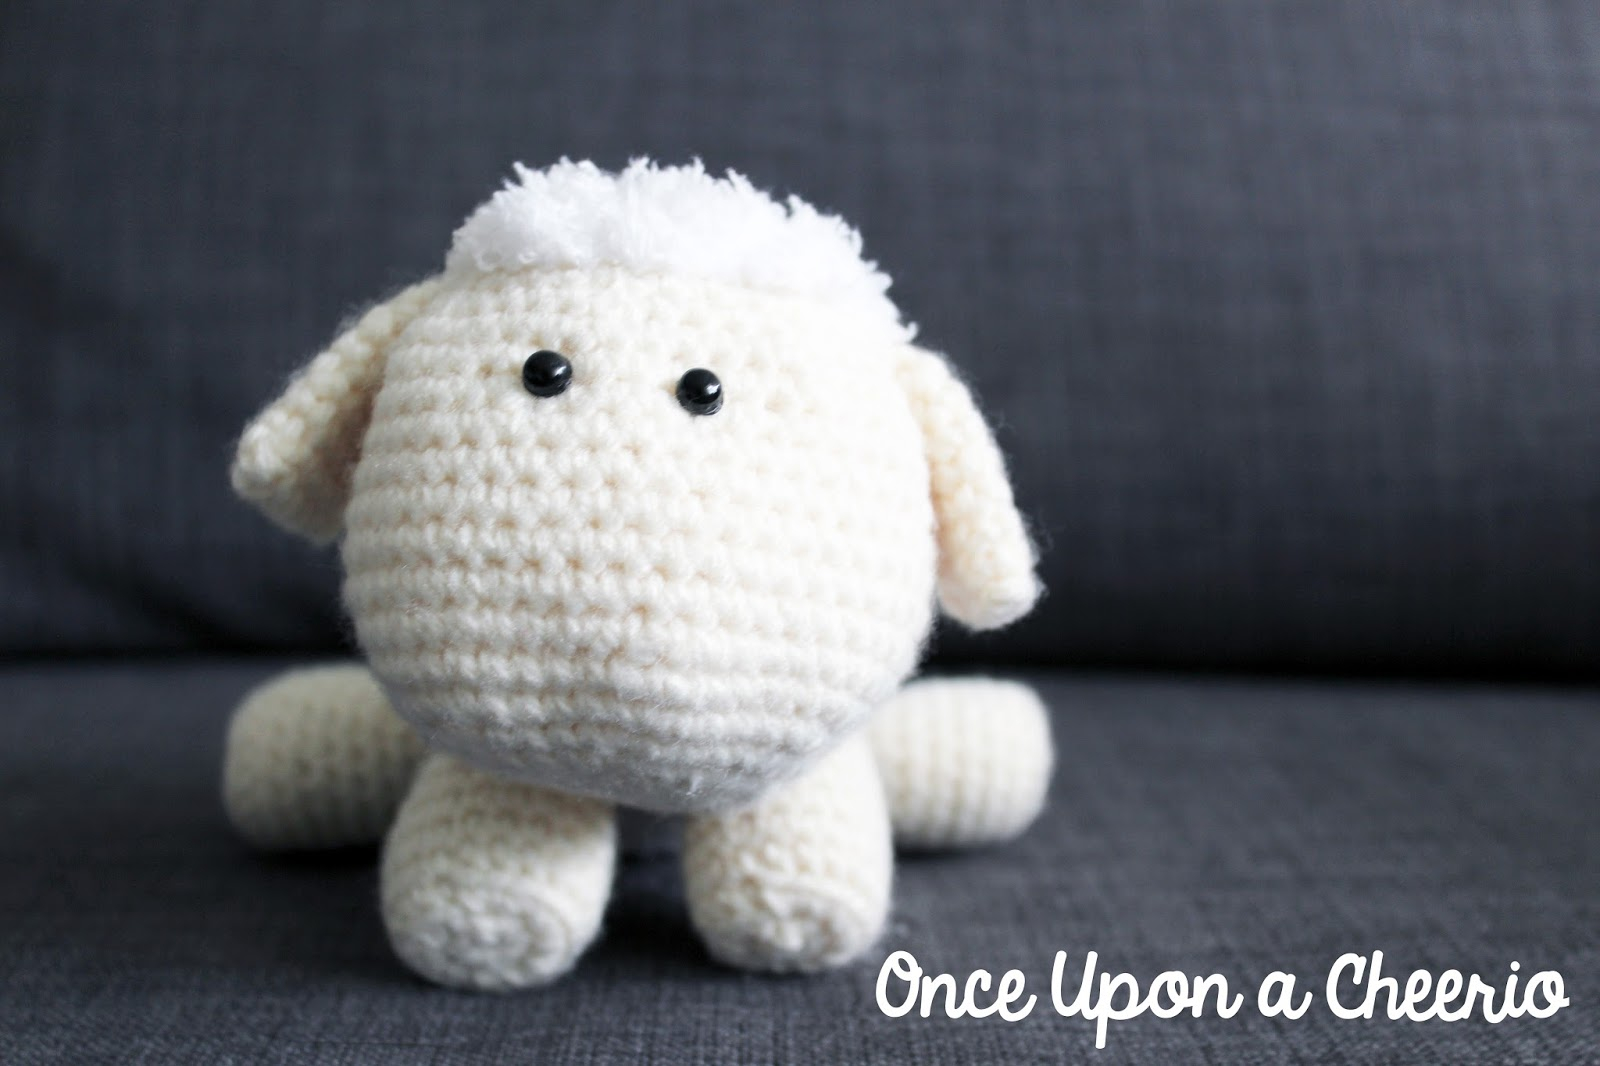 Crochet Sheep Pattern Rosemary The Lamb Crochet Pattern Once Upon A Cheerio